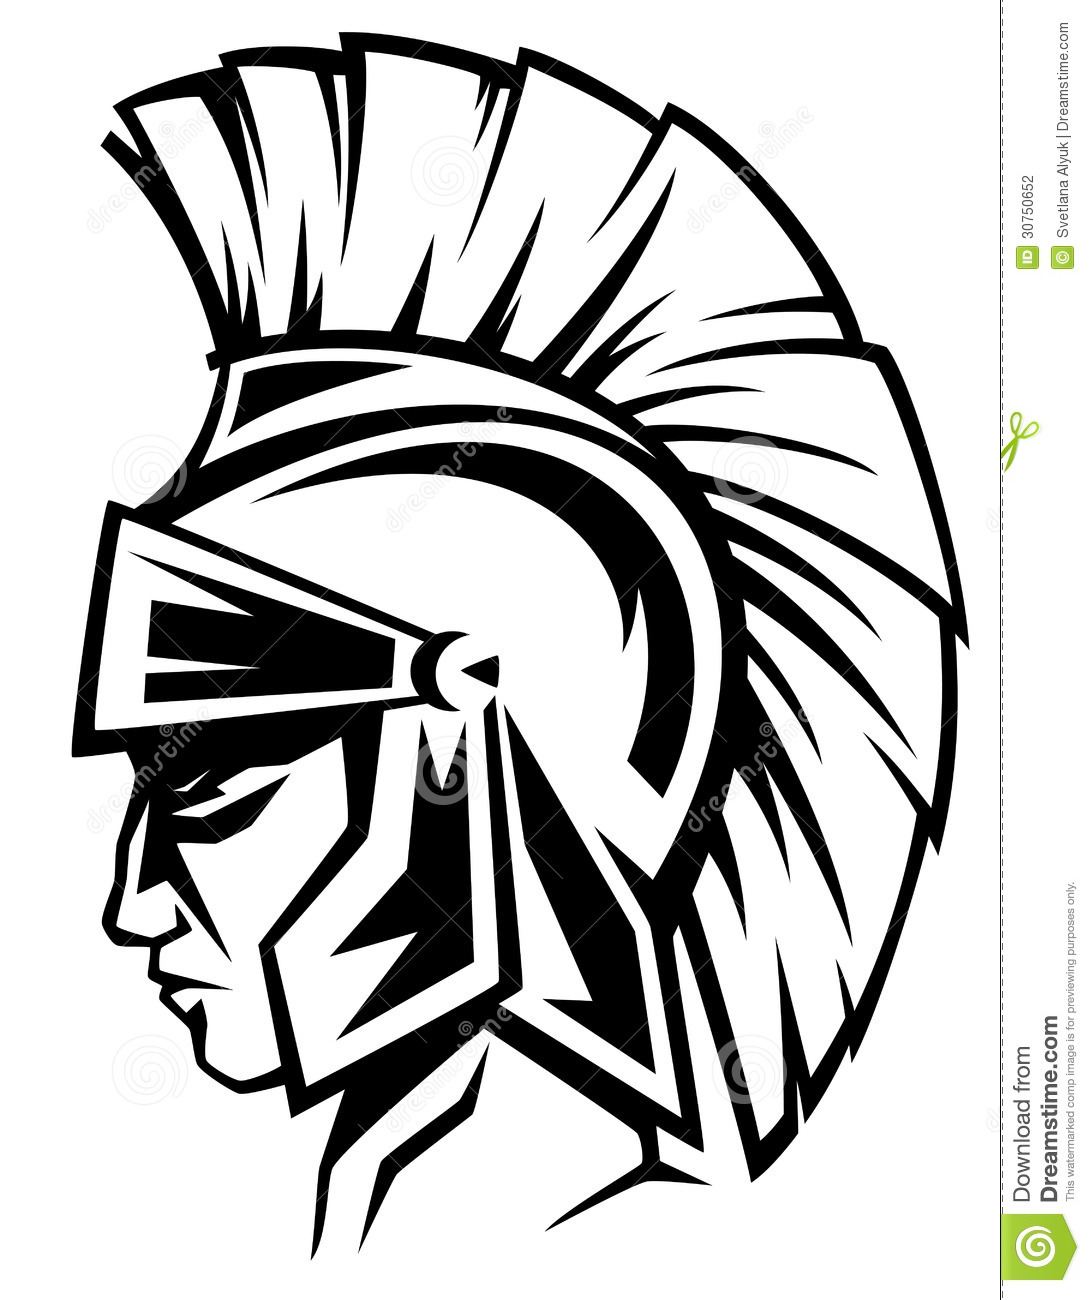 Spartan Warrior Black And White Profile   Ancient Soldier Wearing A